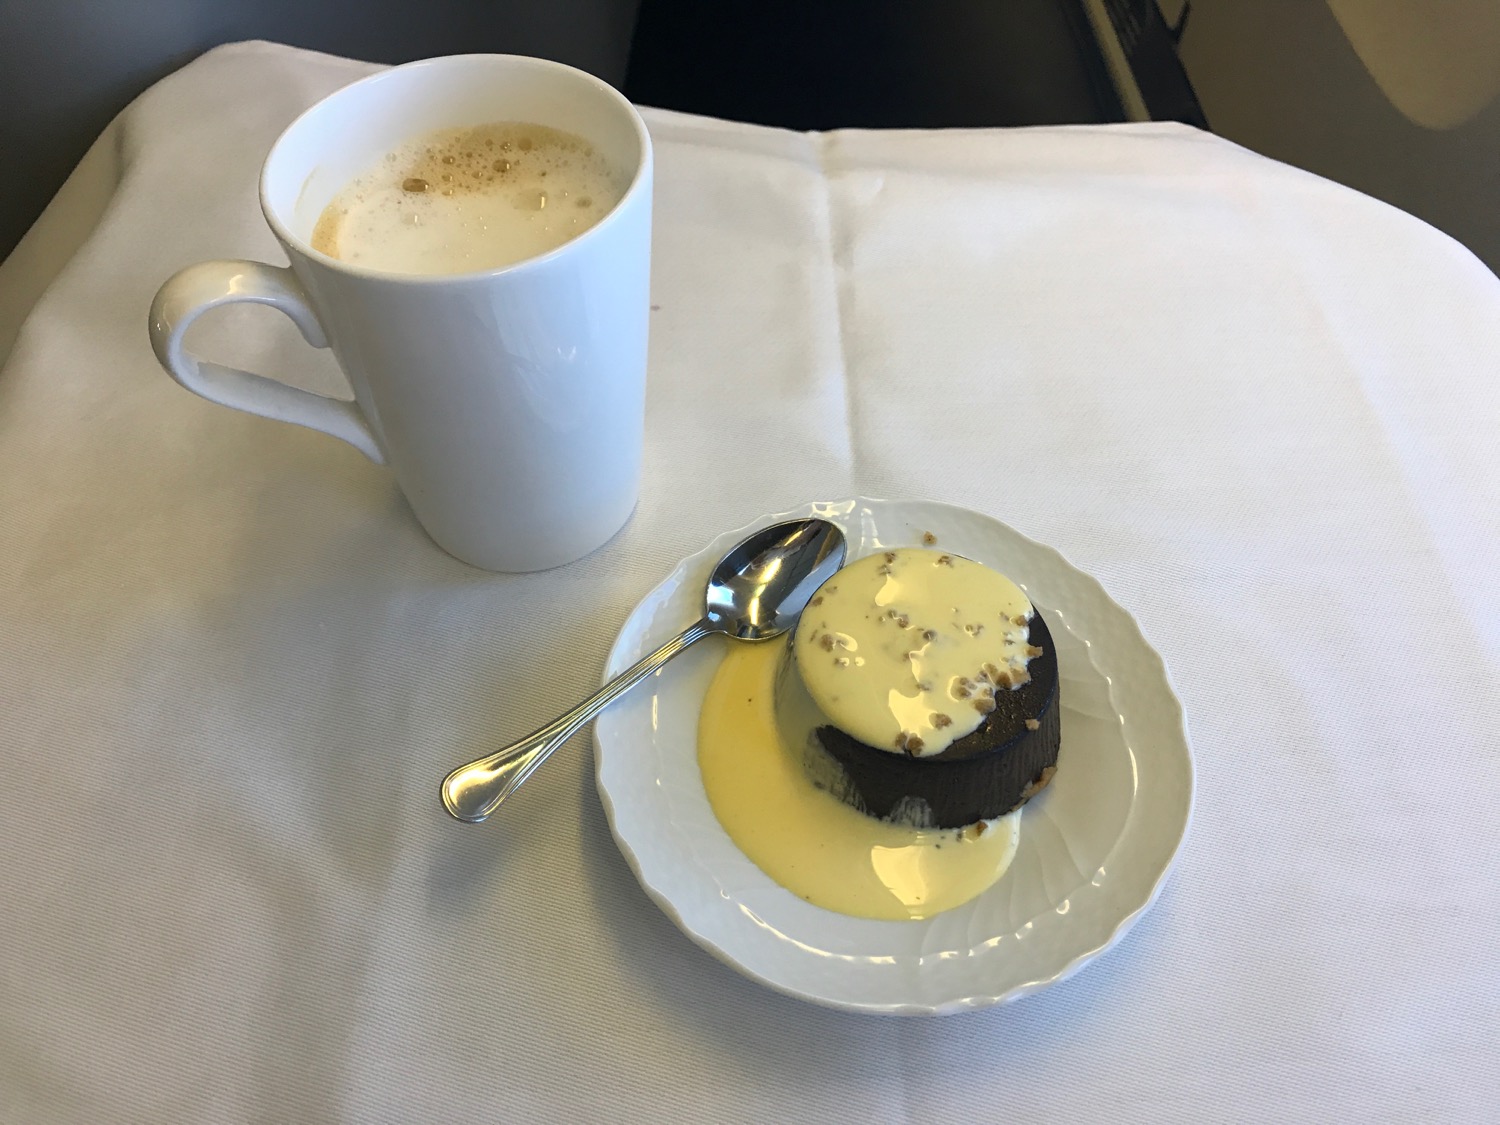 a plate of dessert with a spoon and a cup of coffee